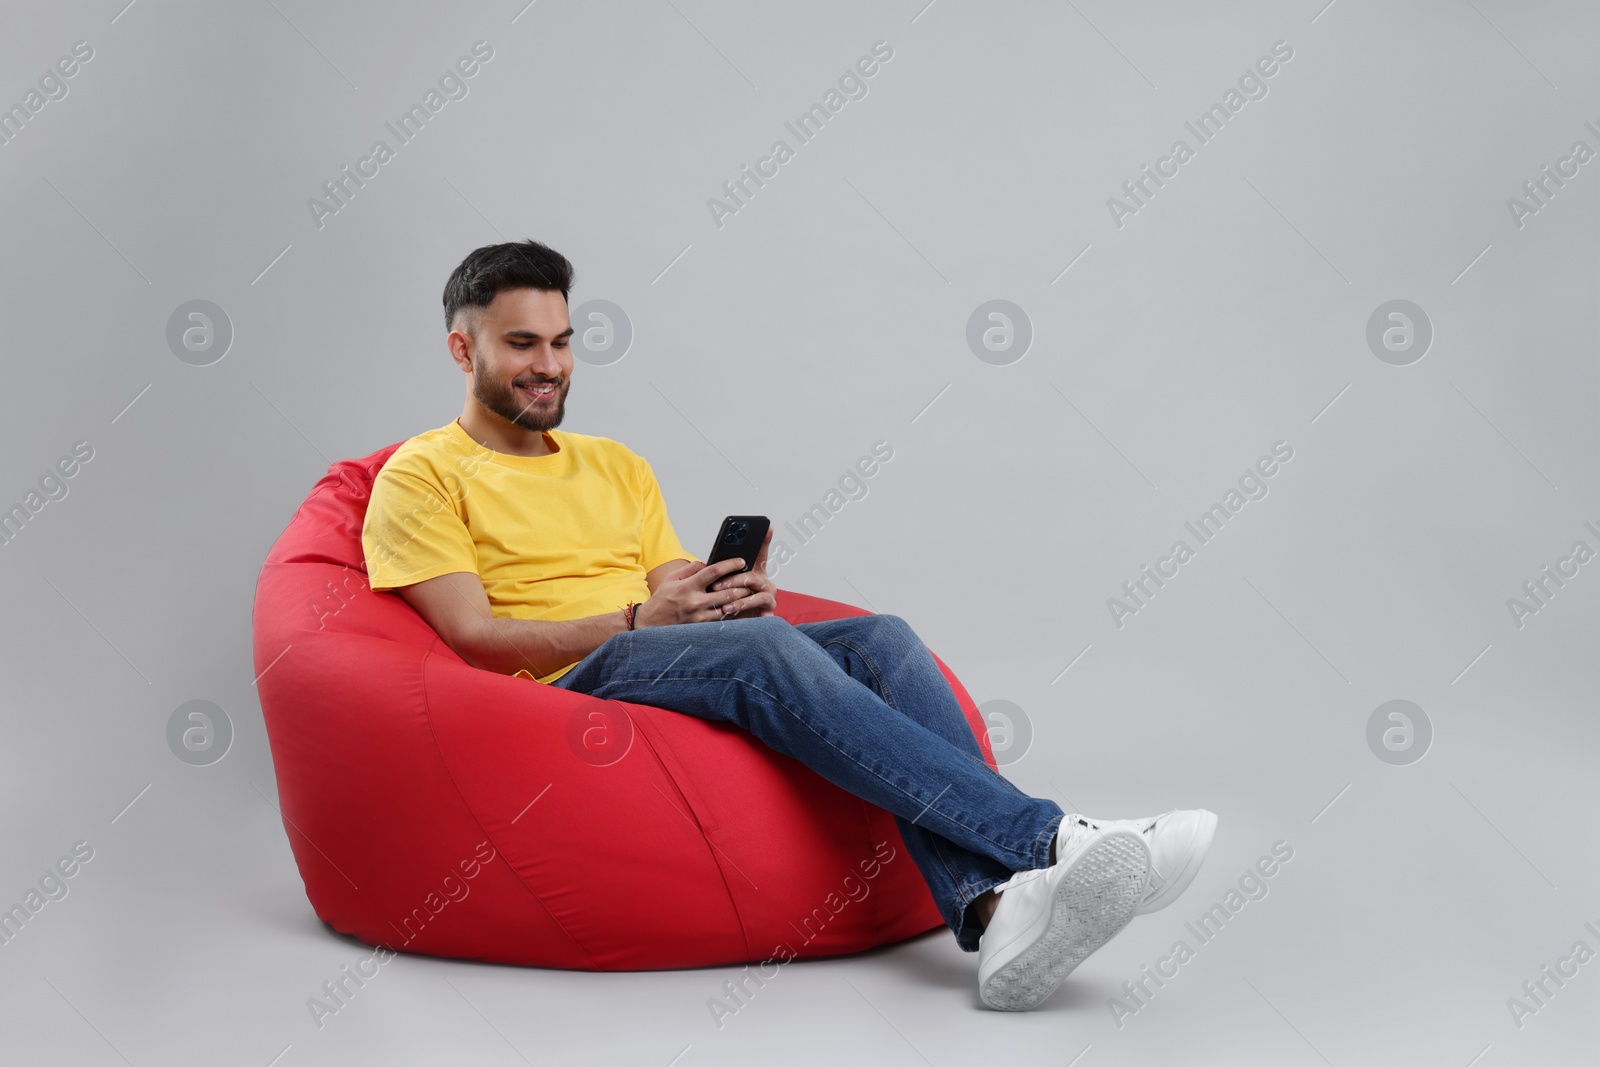 Photo of Happy young man using smartphone on bean bag chair against grey background, space for text